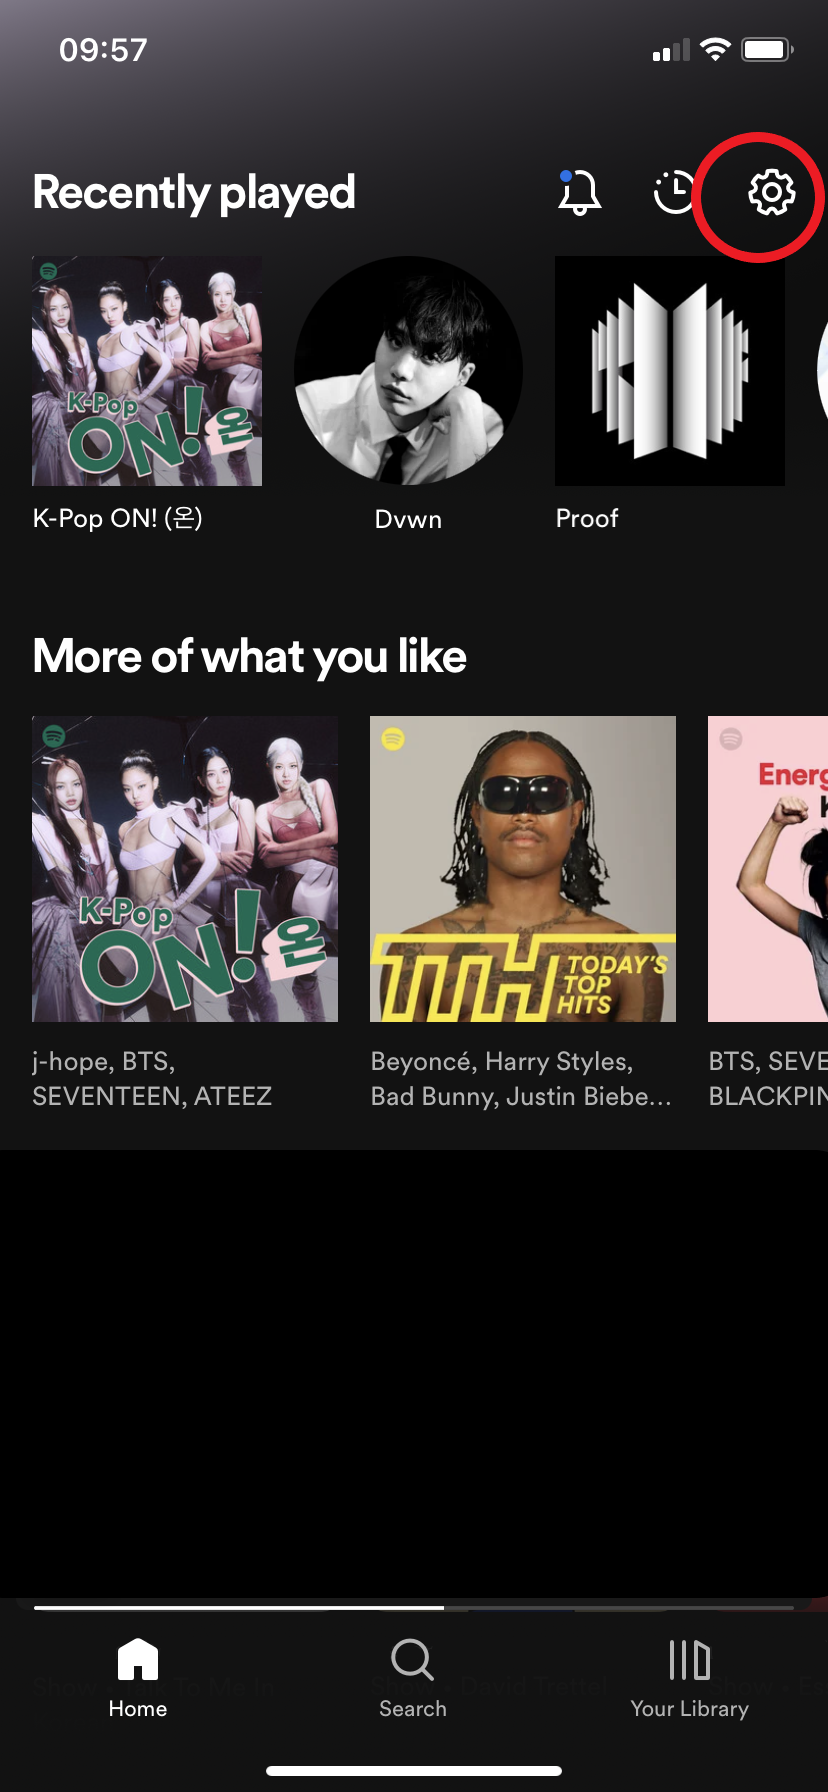 How to censor explicit content on Spotify